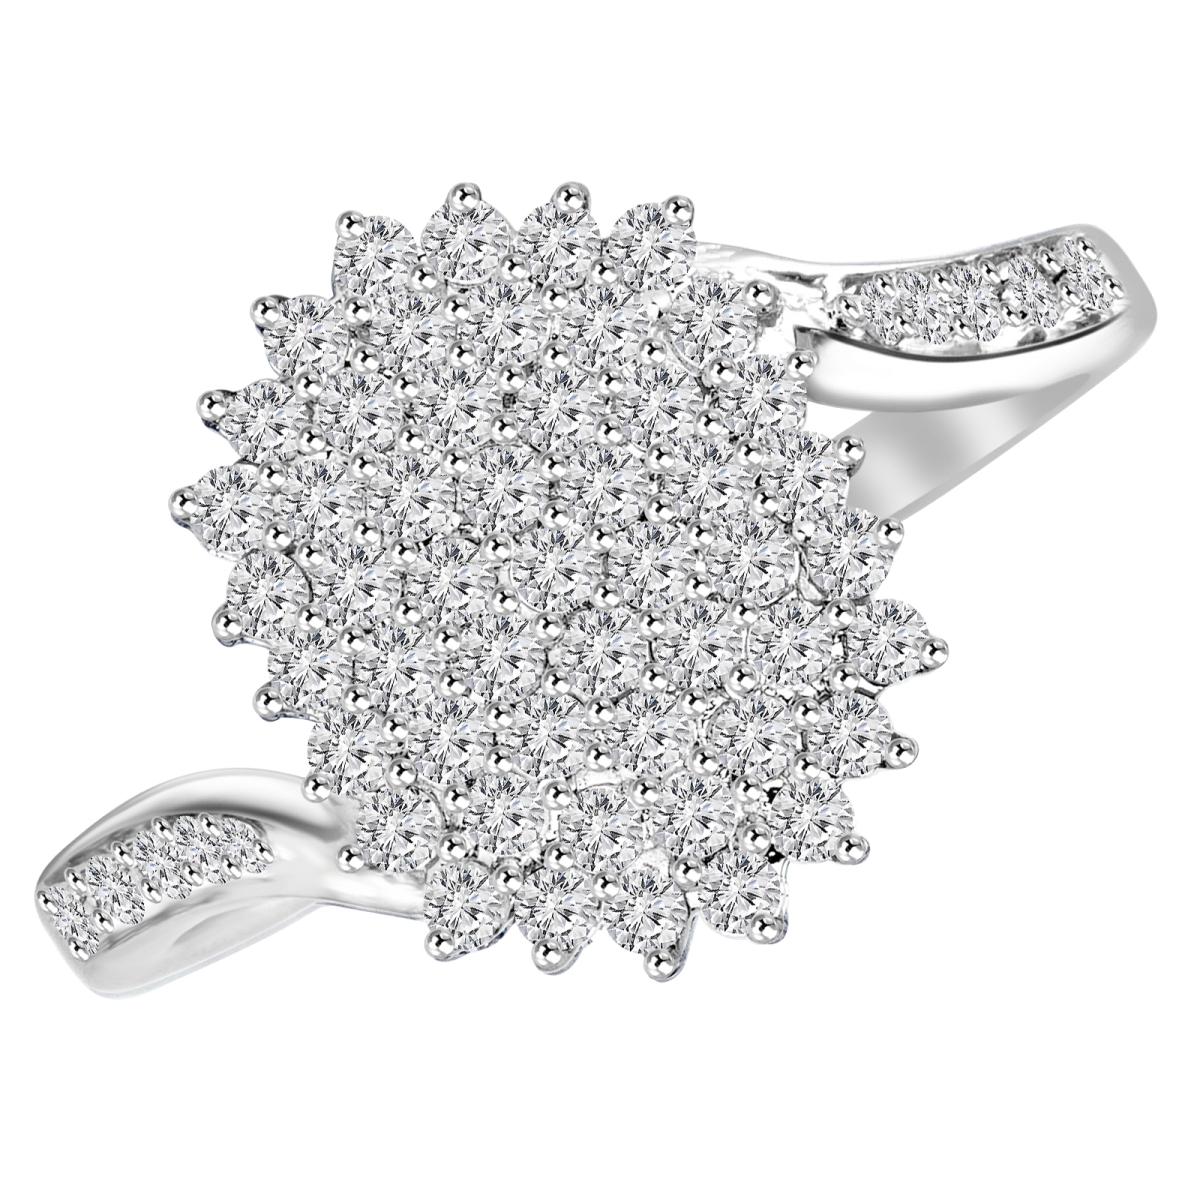 Picture of Majesty Diamonds MDR160007-3 0.5 CTW Round Diamond Cluster Cocktail Ring in 14K White Gold - Size 3